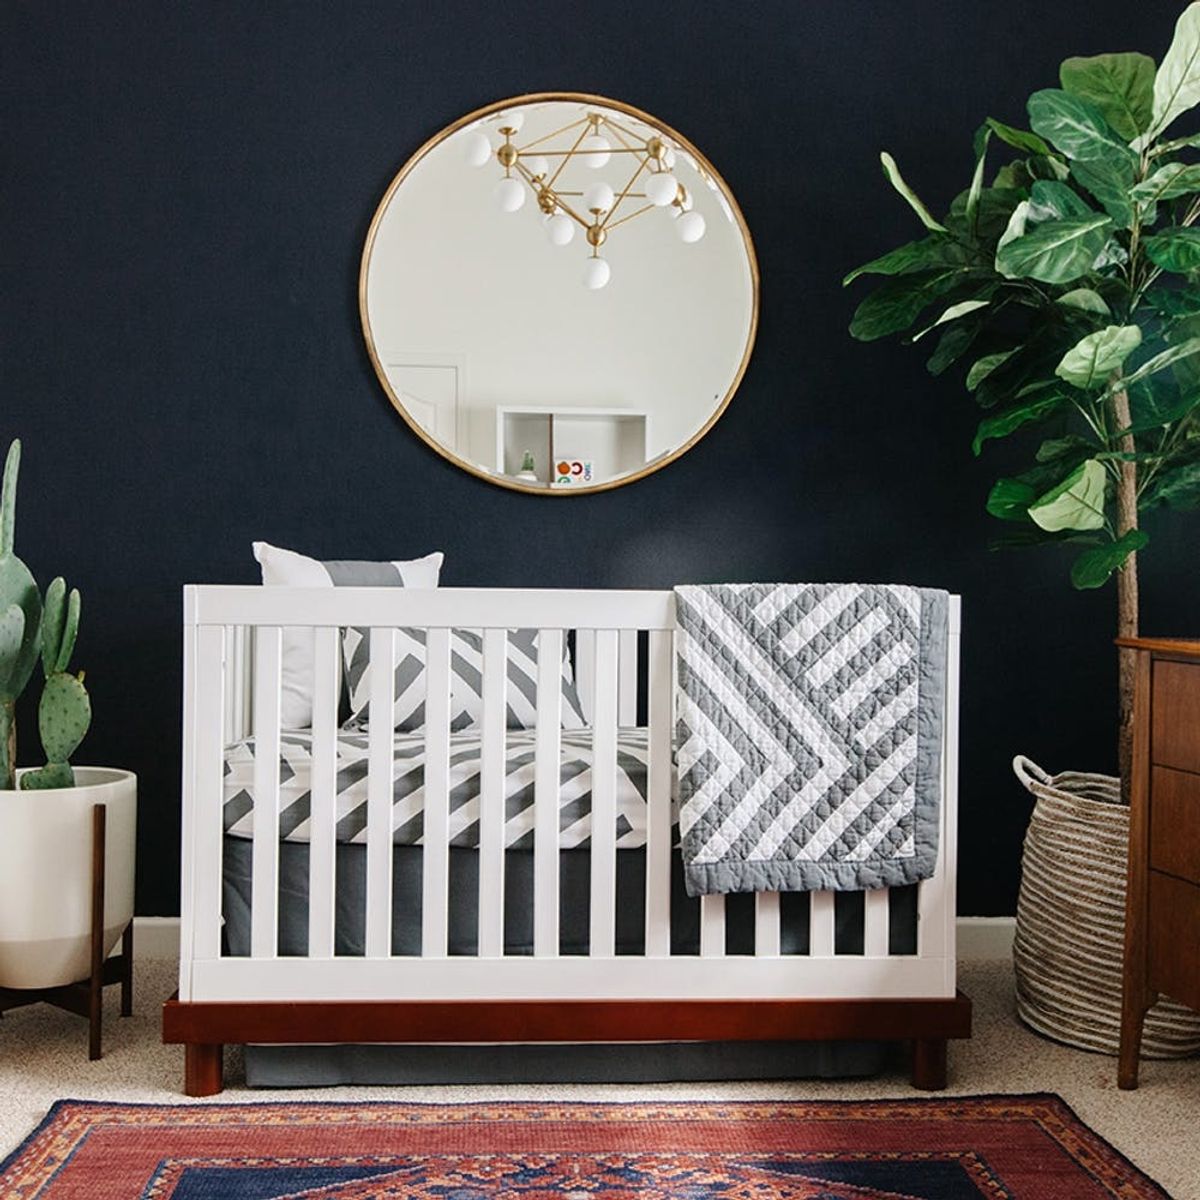 These Are the Trending Nursery Colors This Year (and They’re Not What You’d Expect)